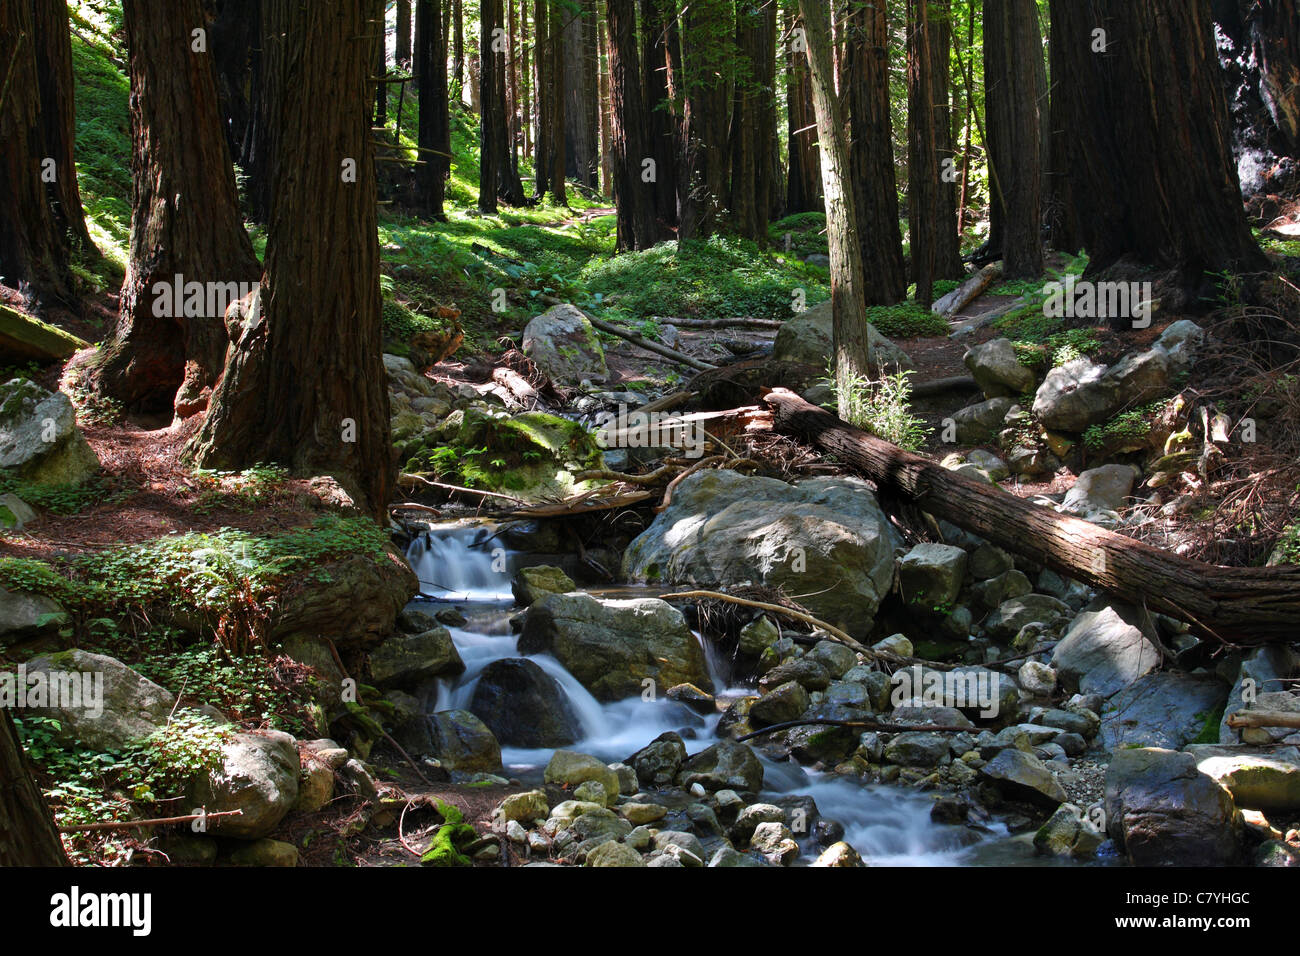 Lime Kiln creek flows through the redwood forest of Lime Kiln State Park. Stock Photo